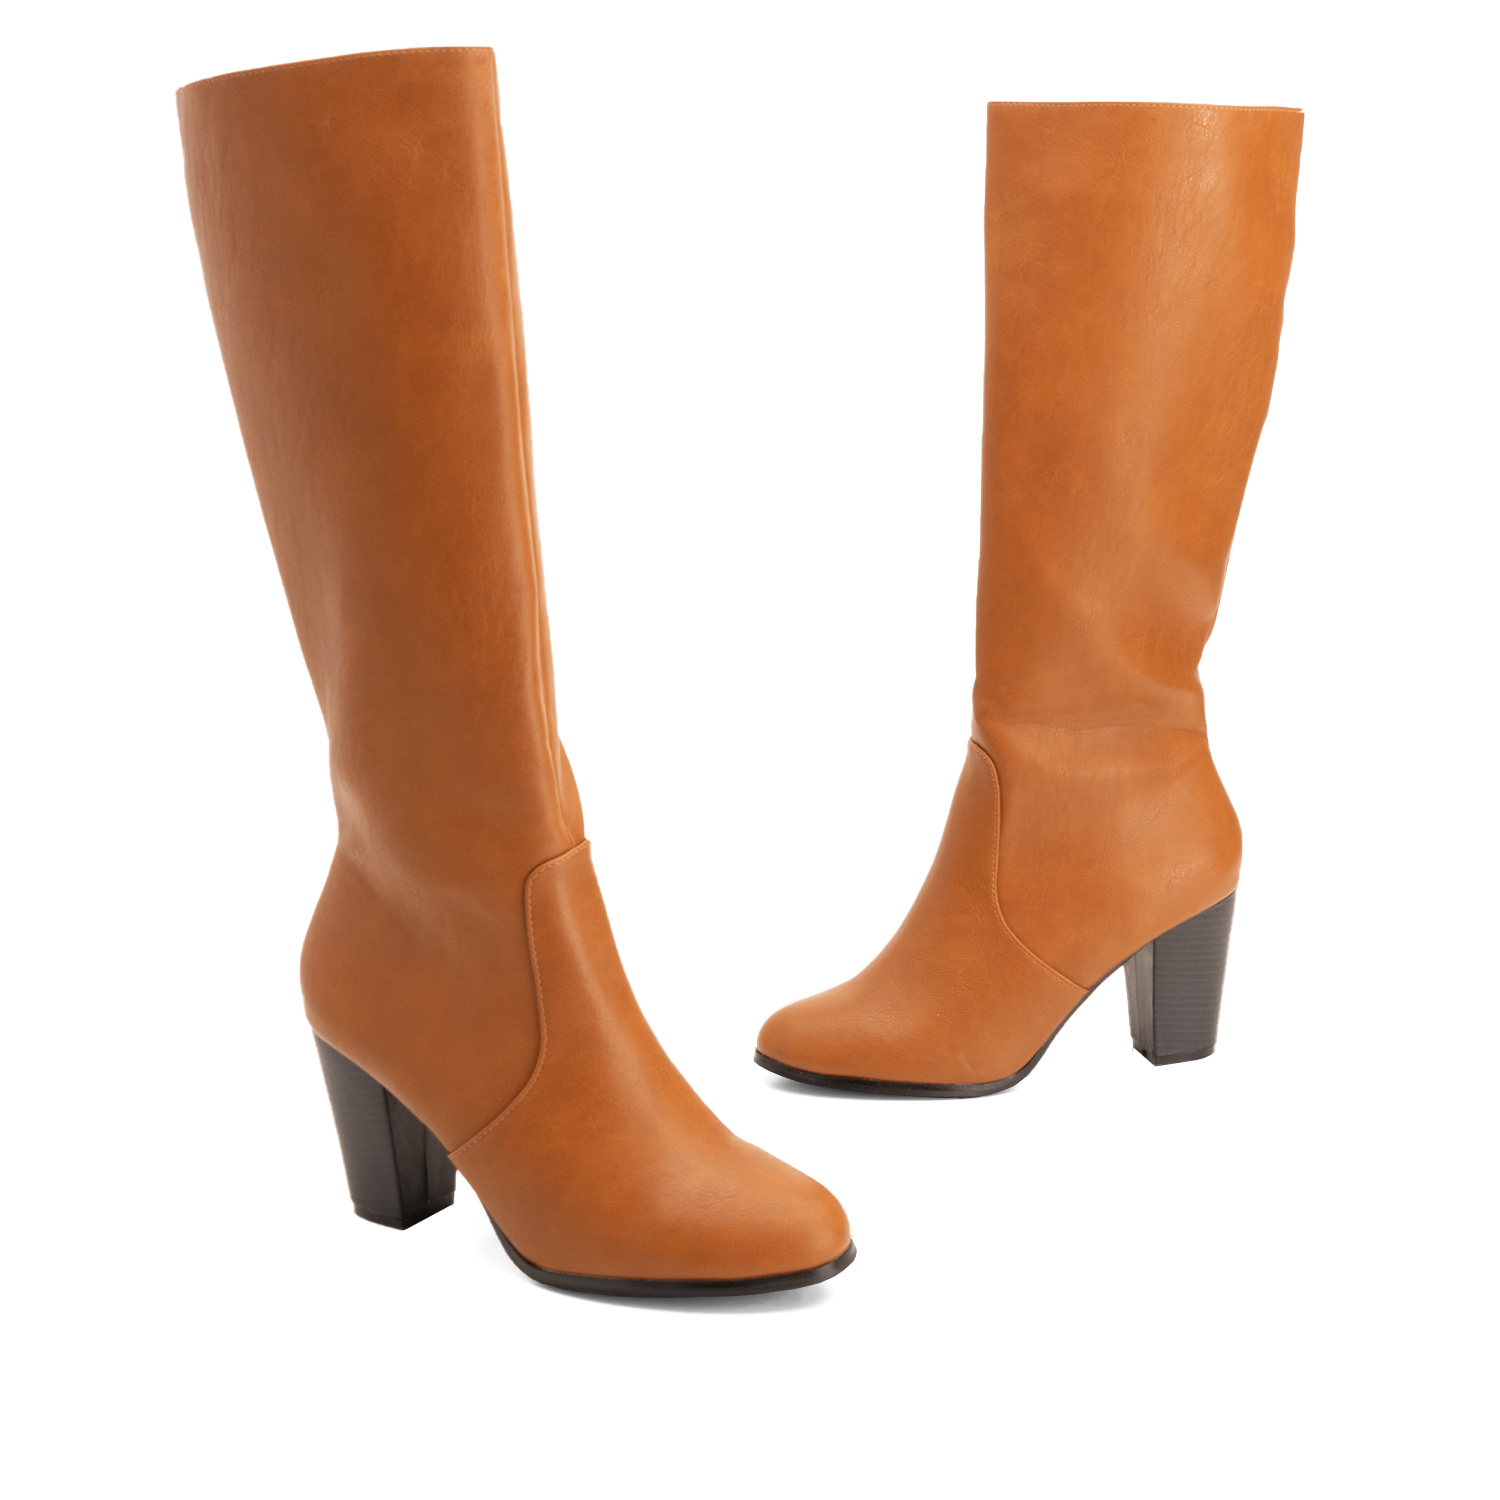 Hohe Mid Calf Stiefel in Camel 